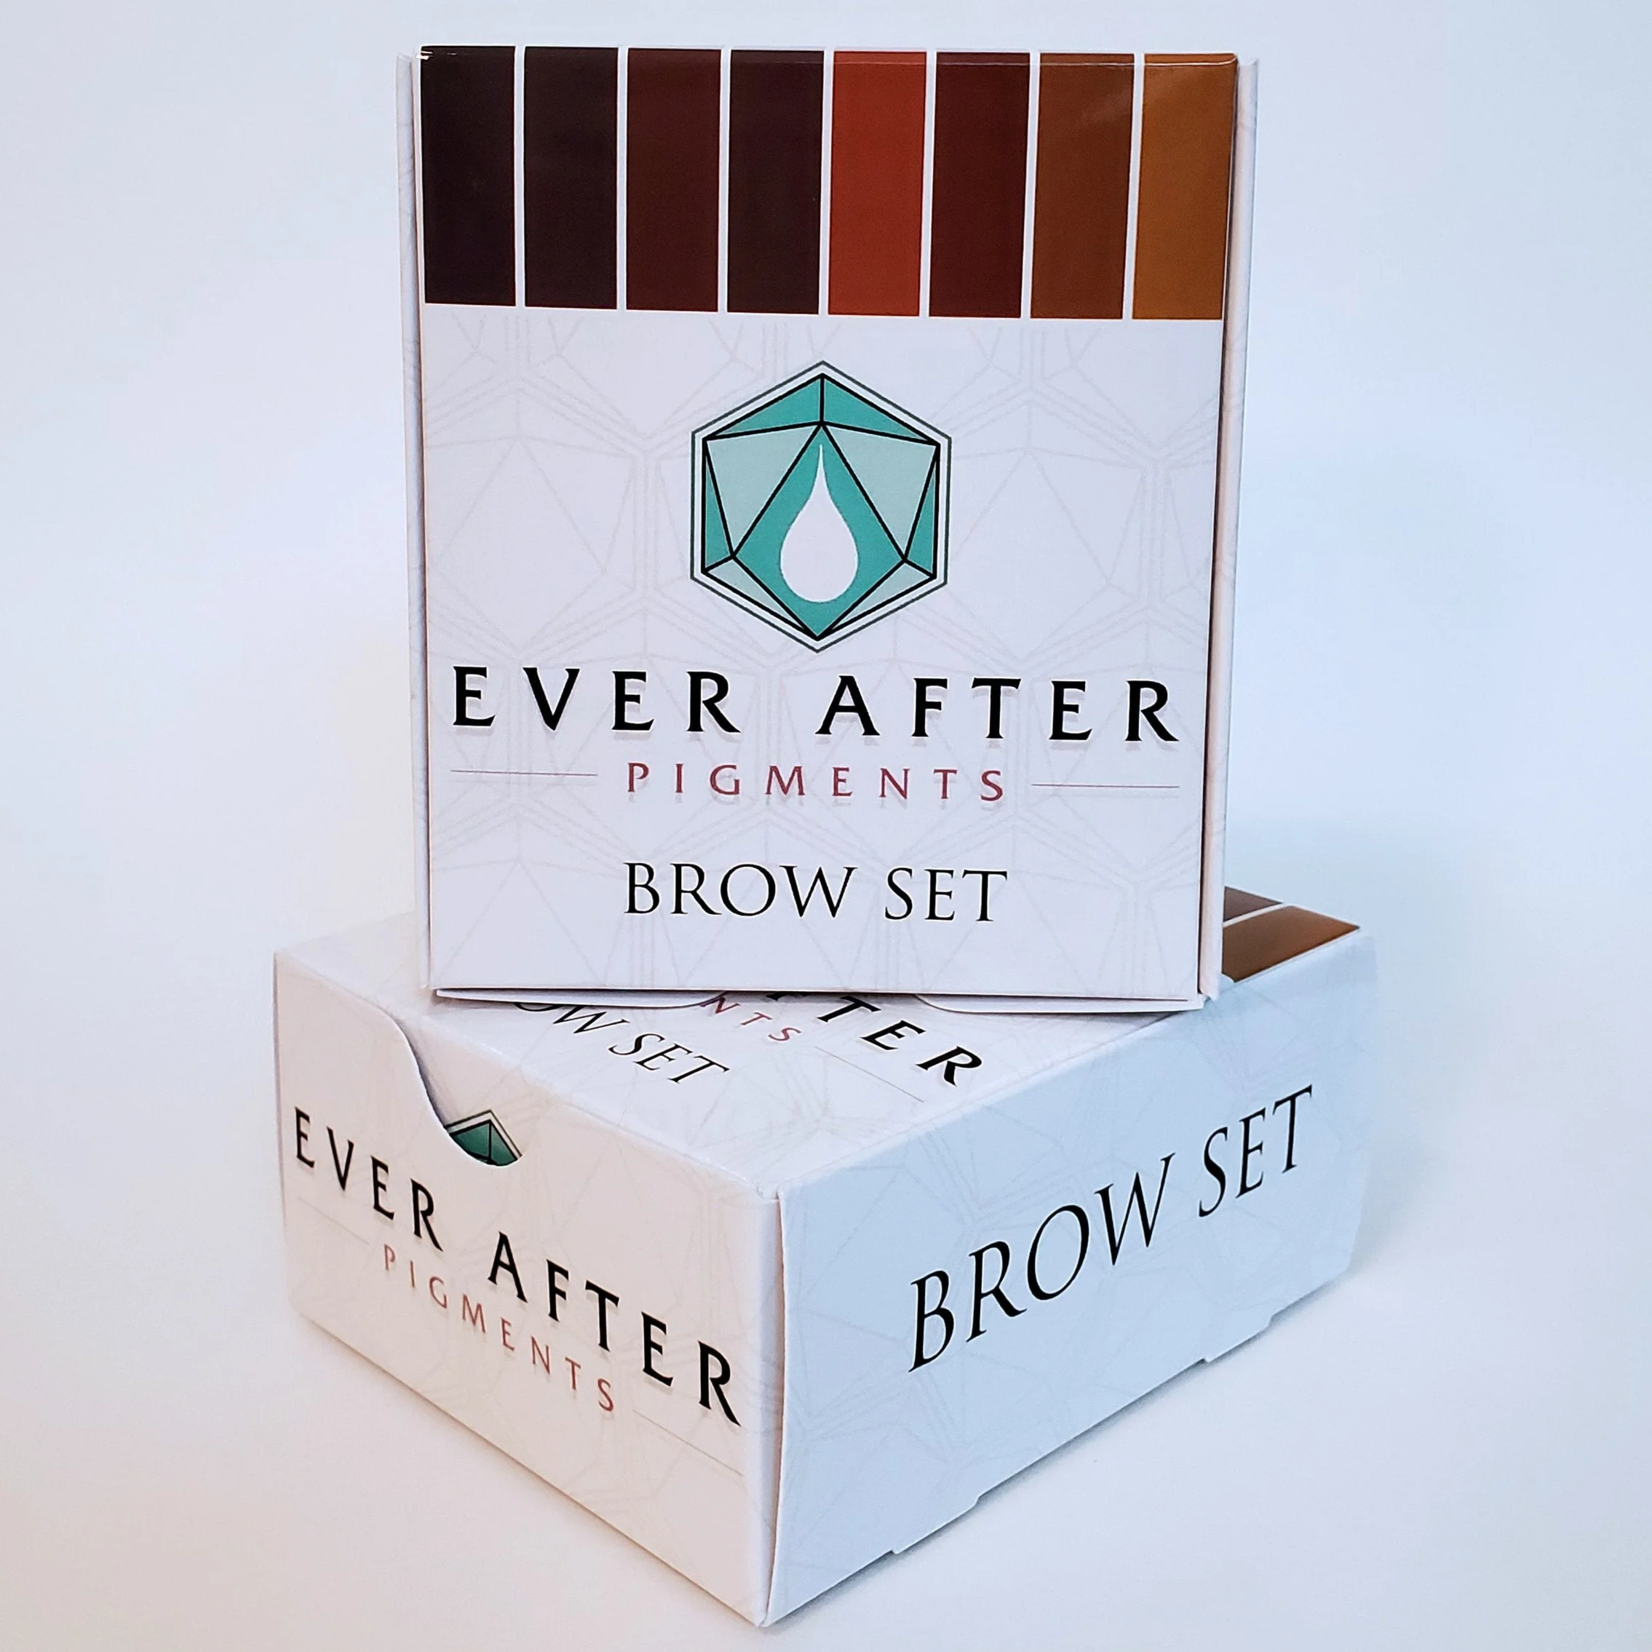 EVER AFTER PIGMENTS BROW SET 0.5OZ